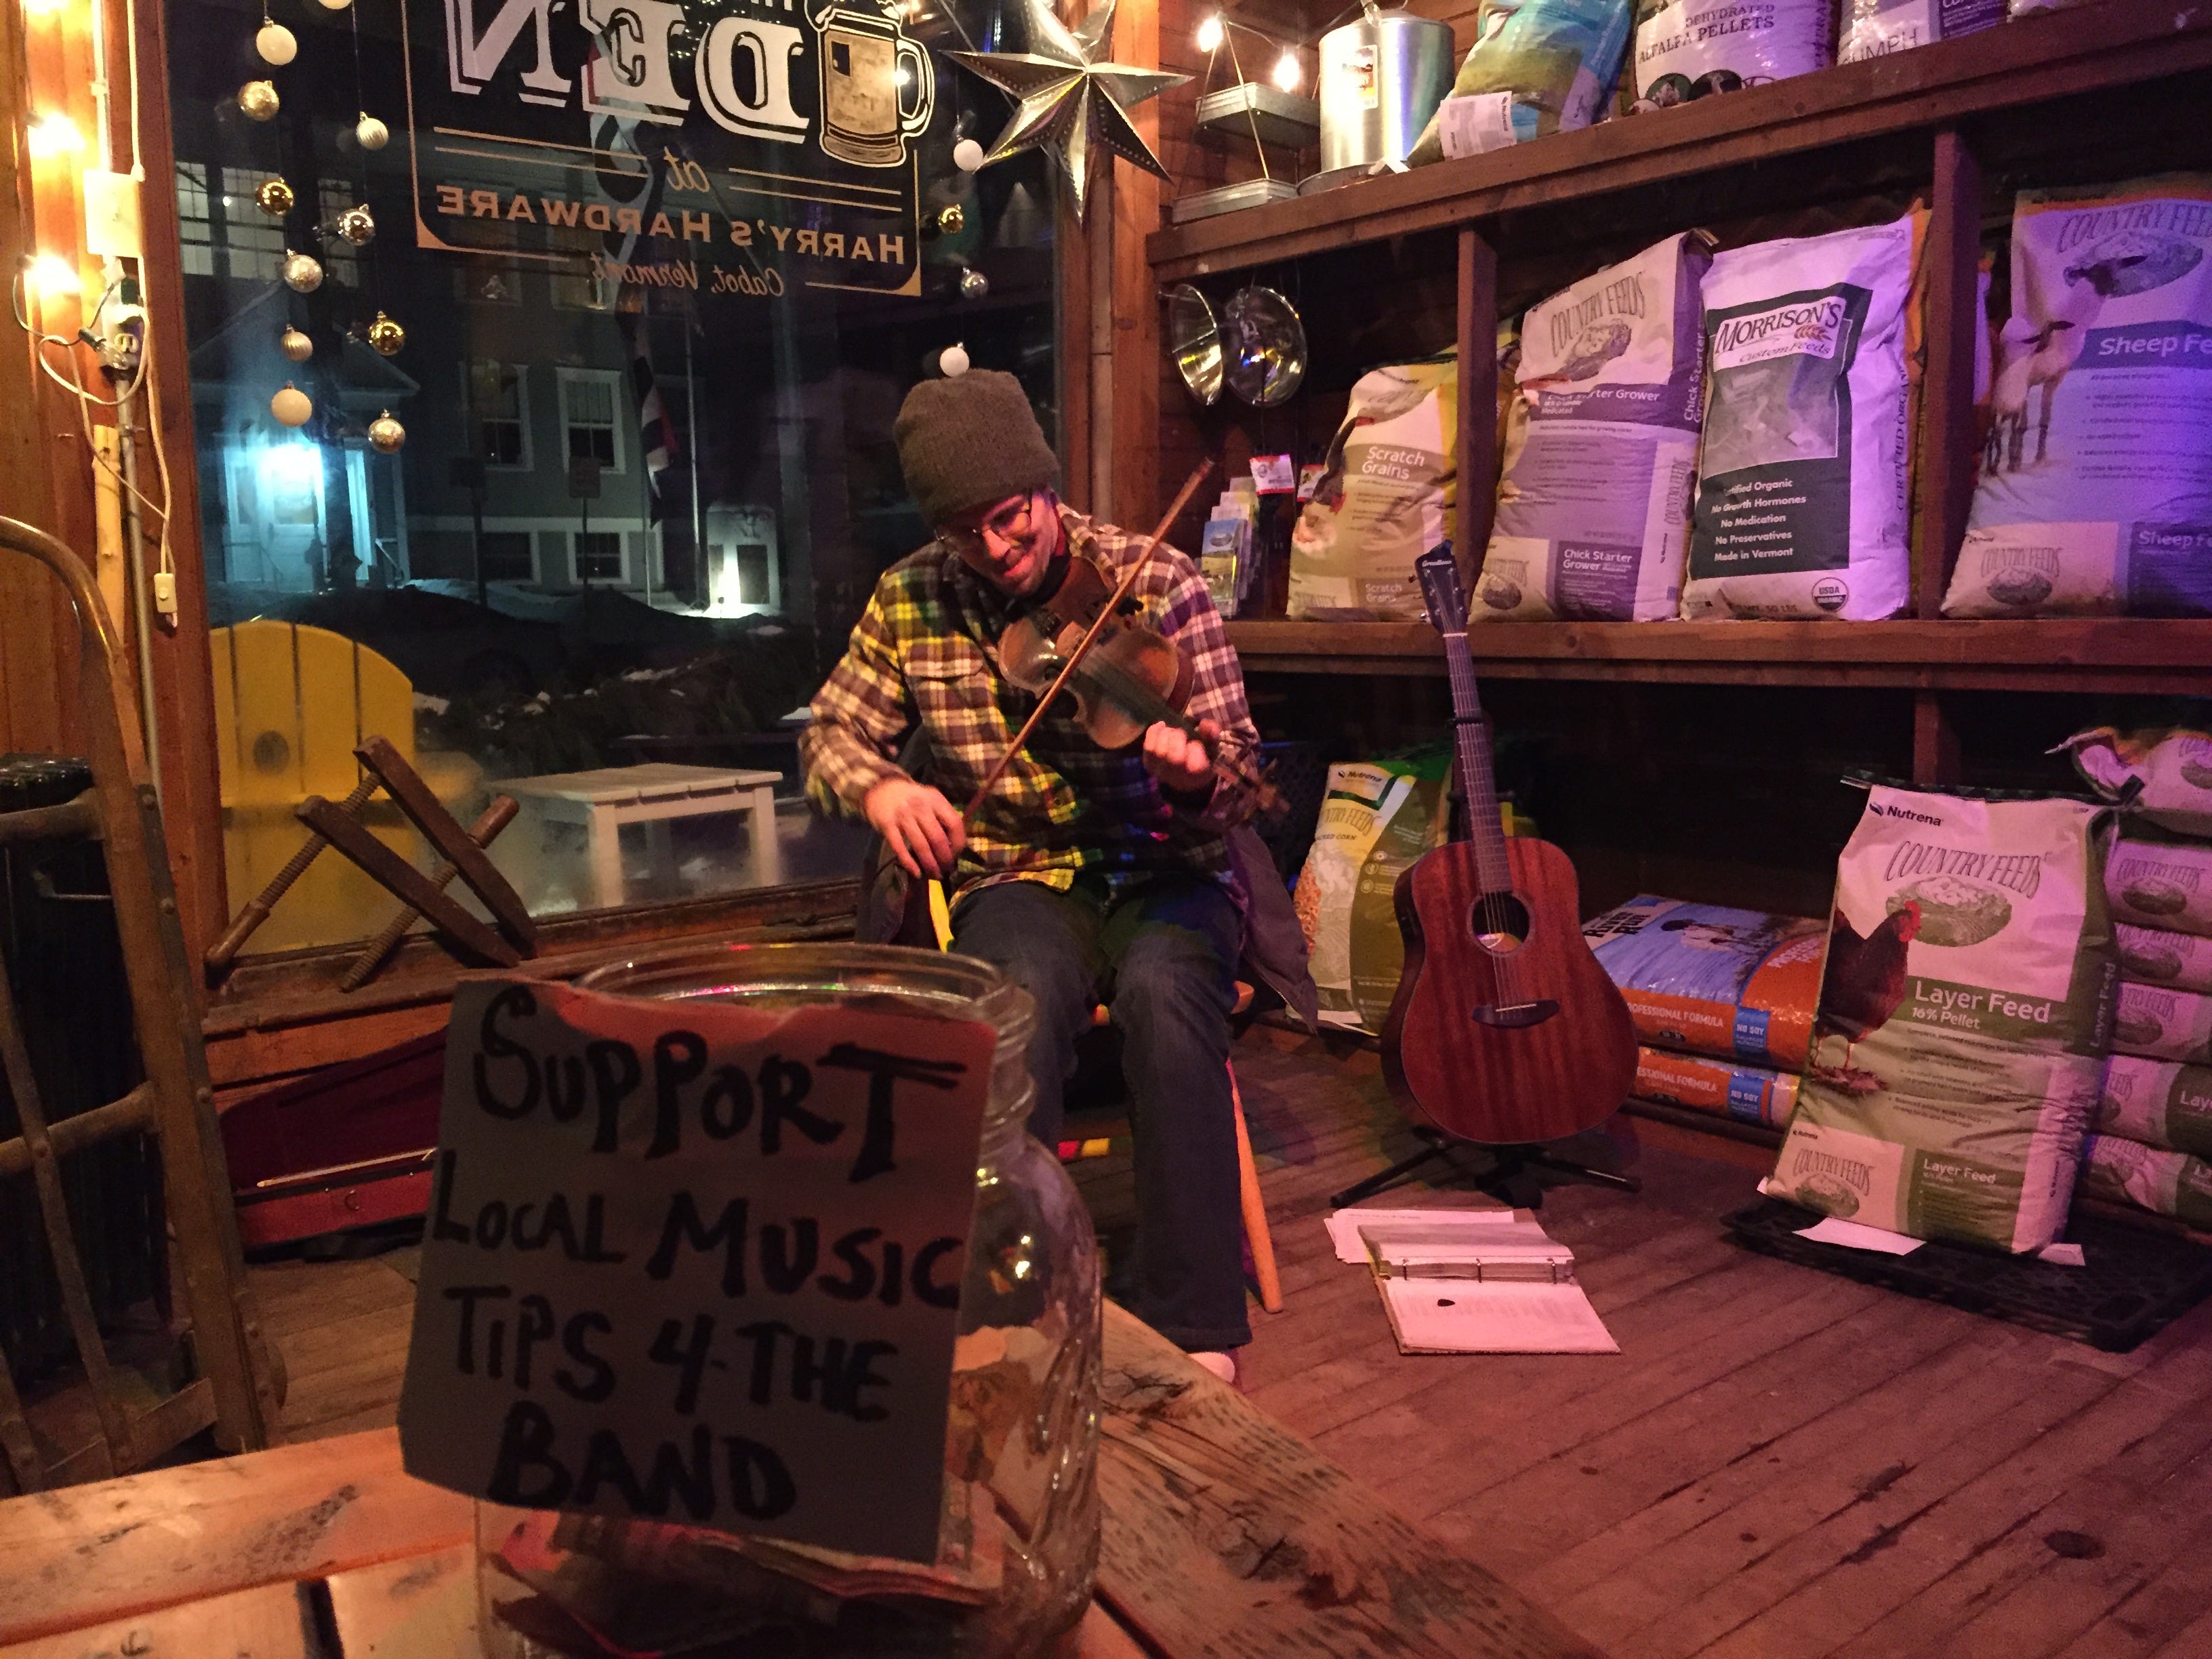 Harry's Hardware: The VT shop where you can buy beer and hear music